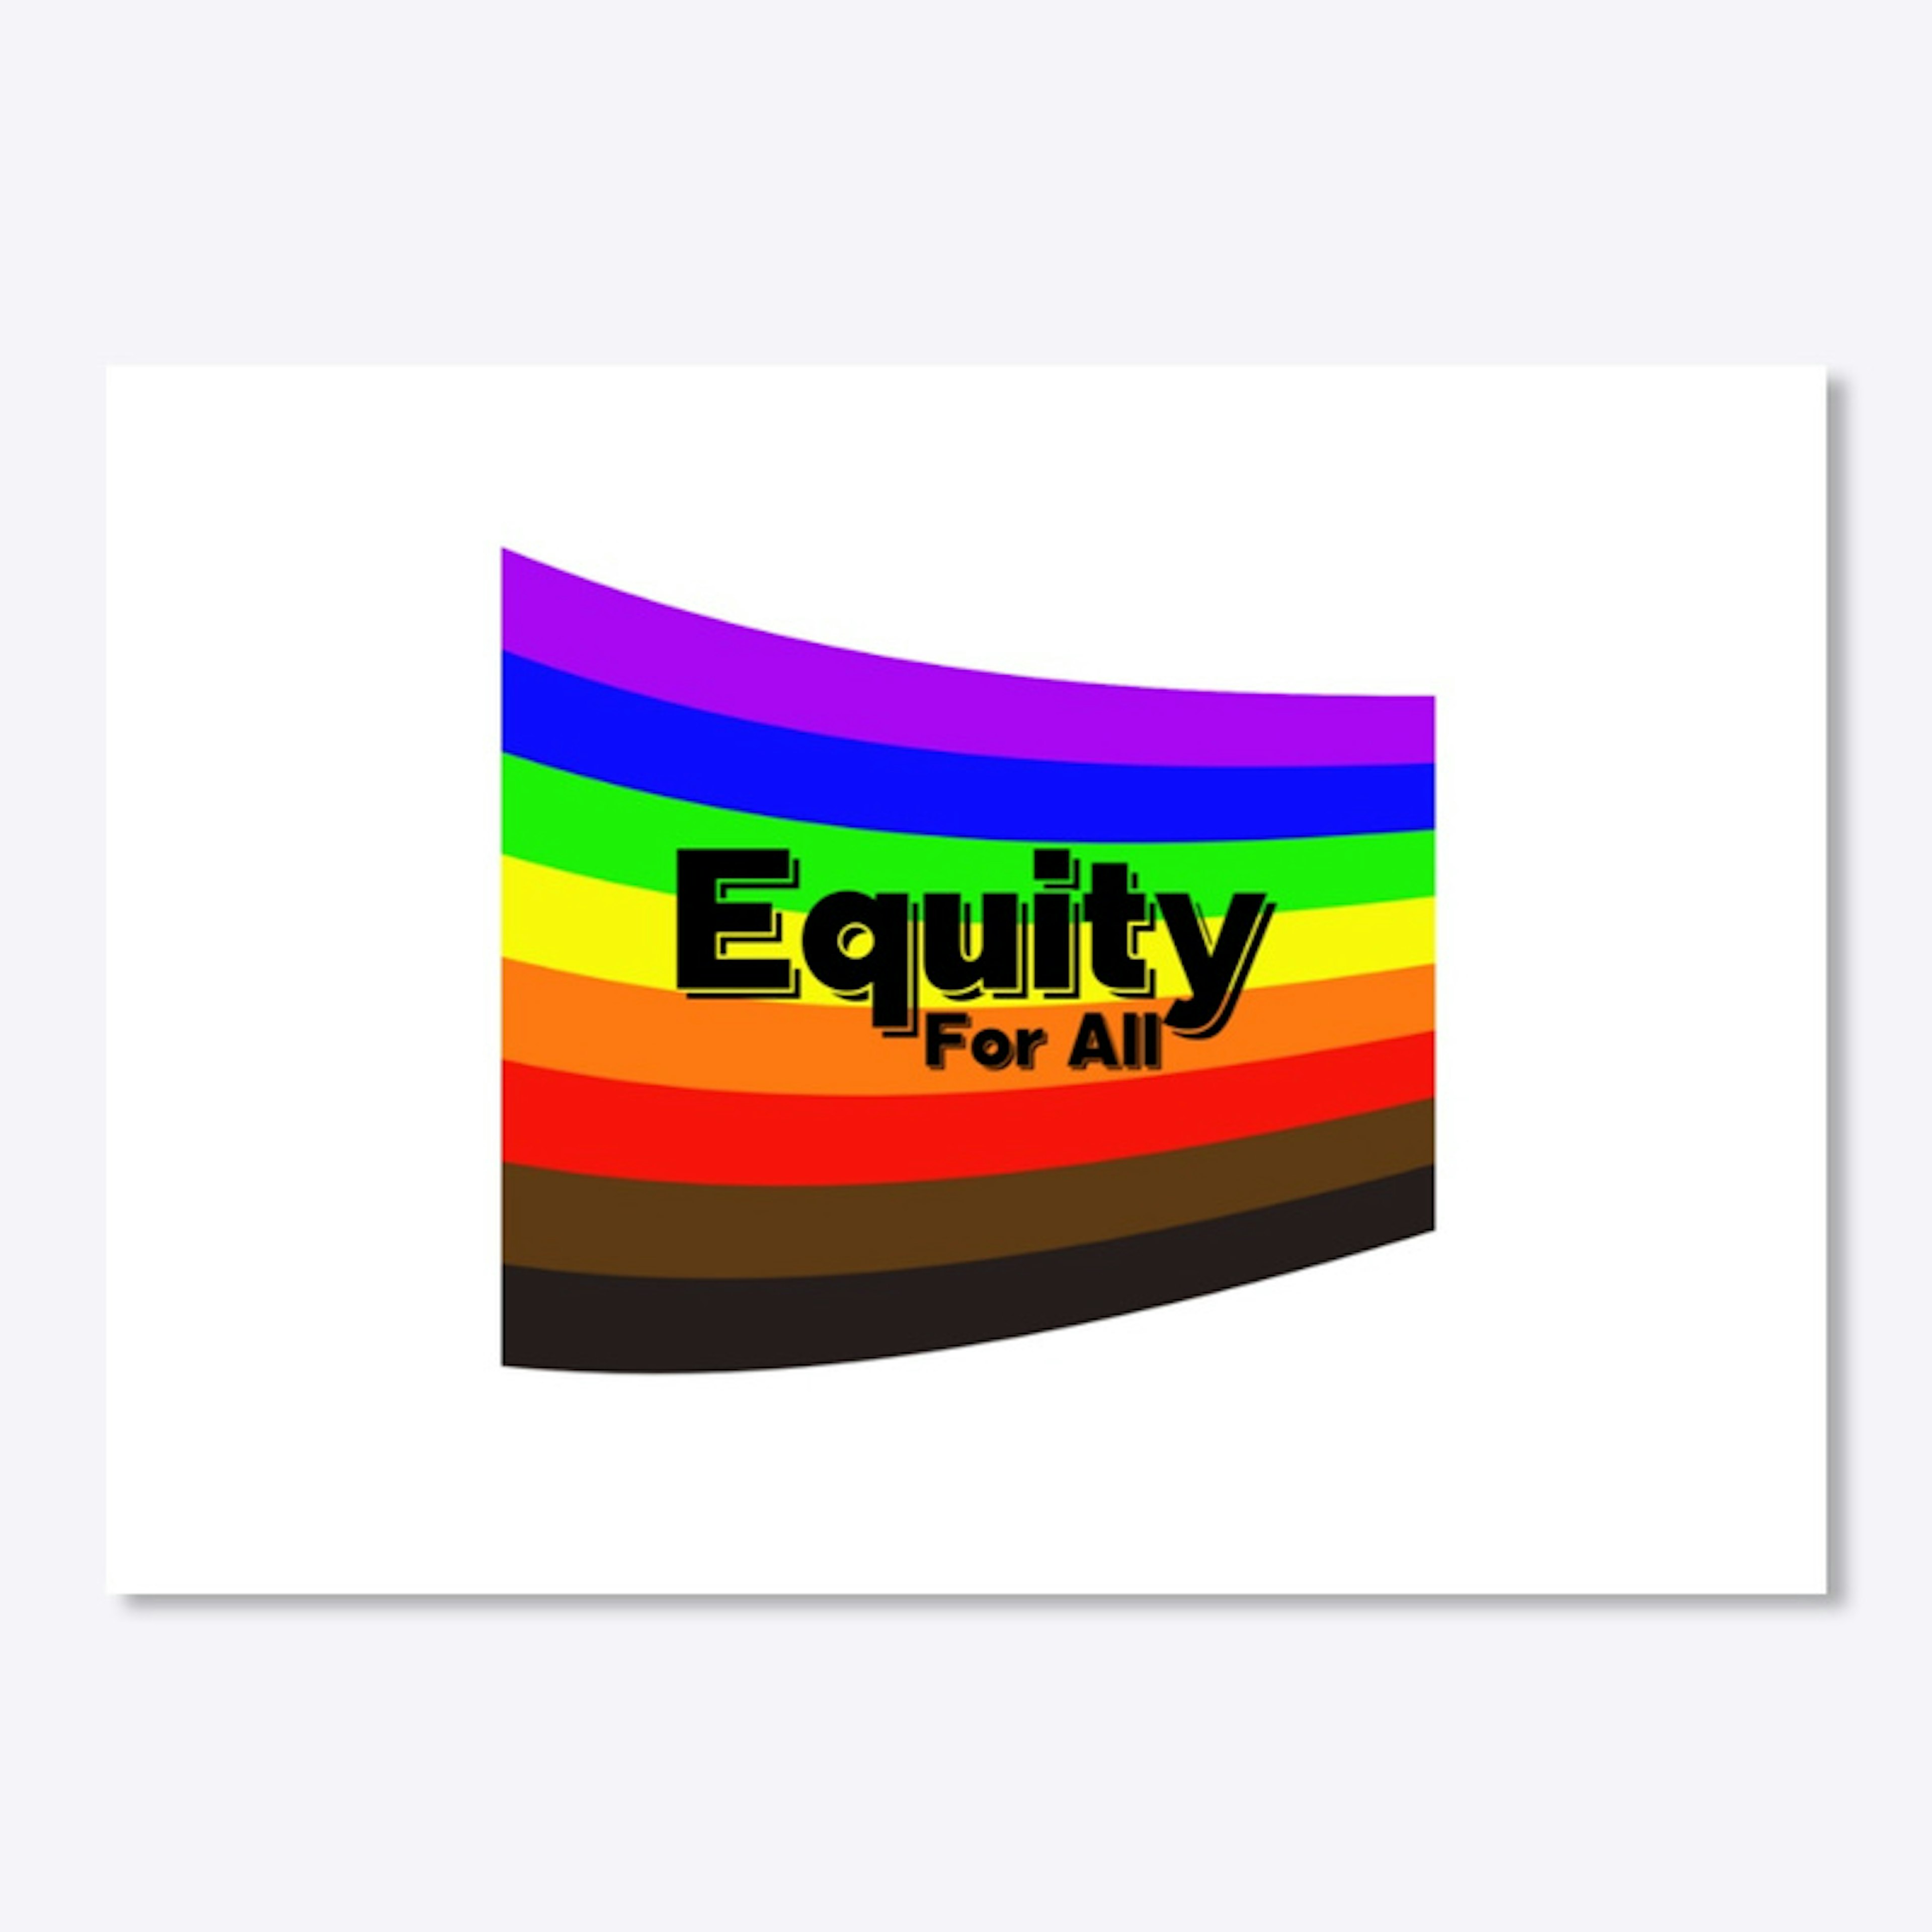 Equity for All (Flag)